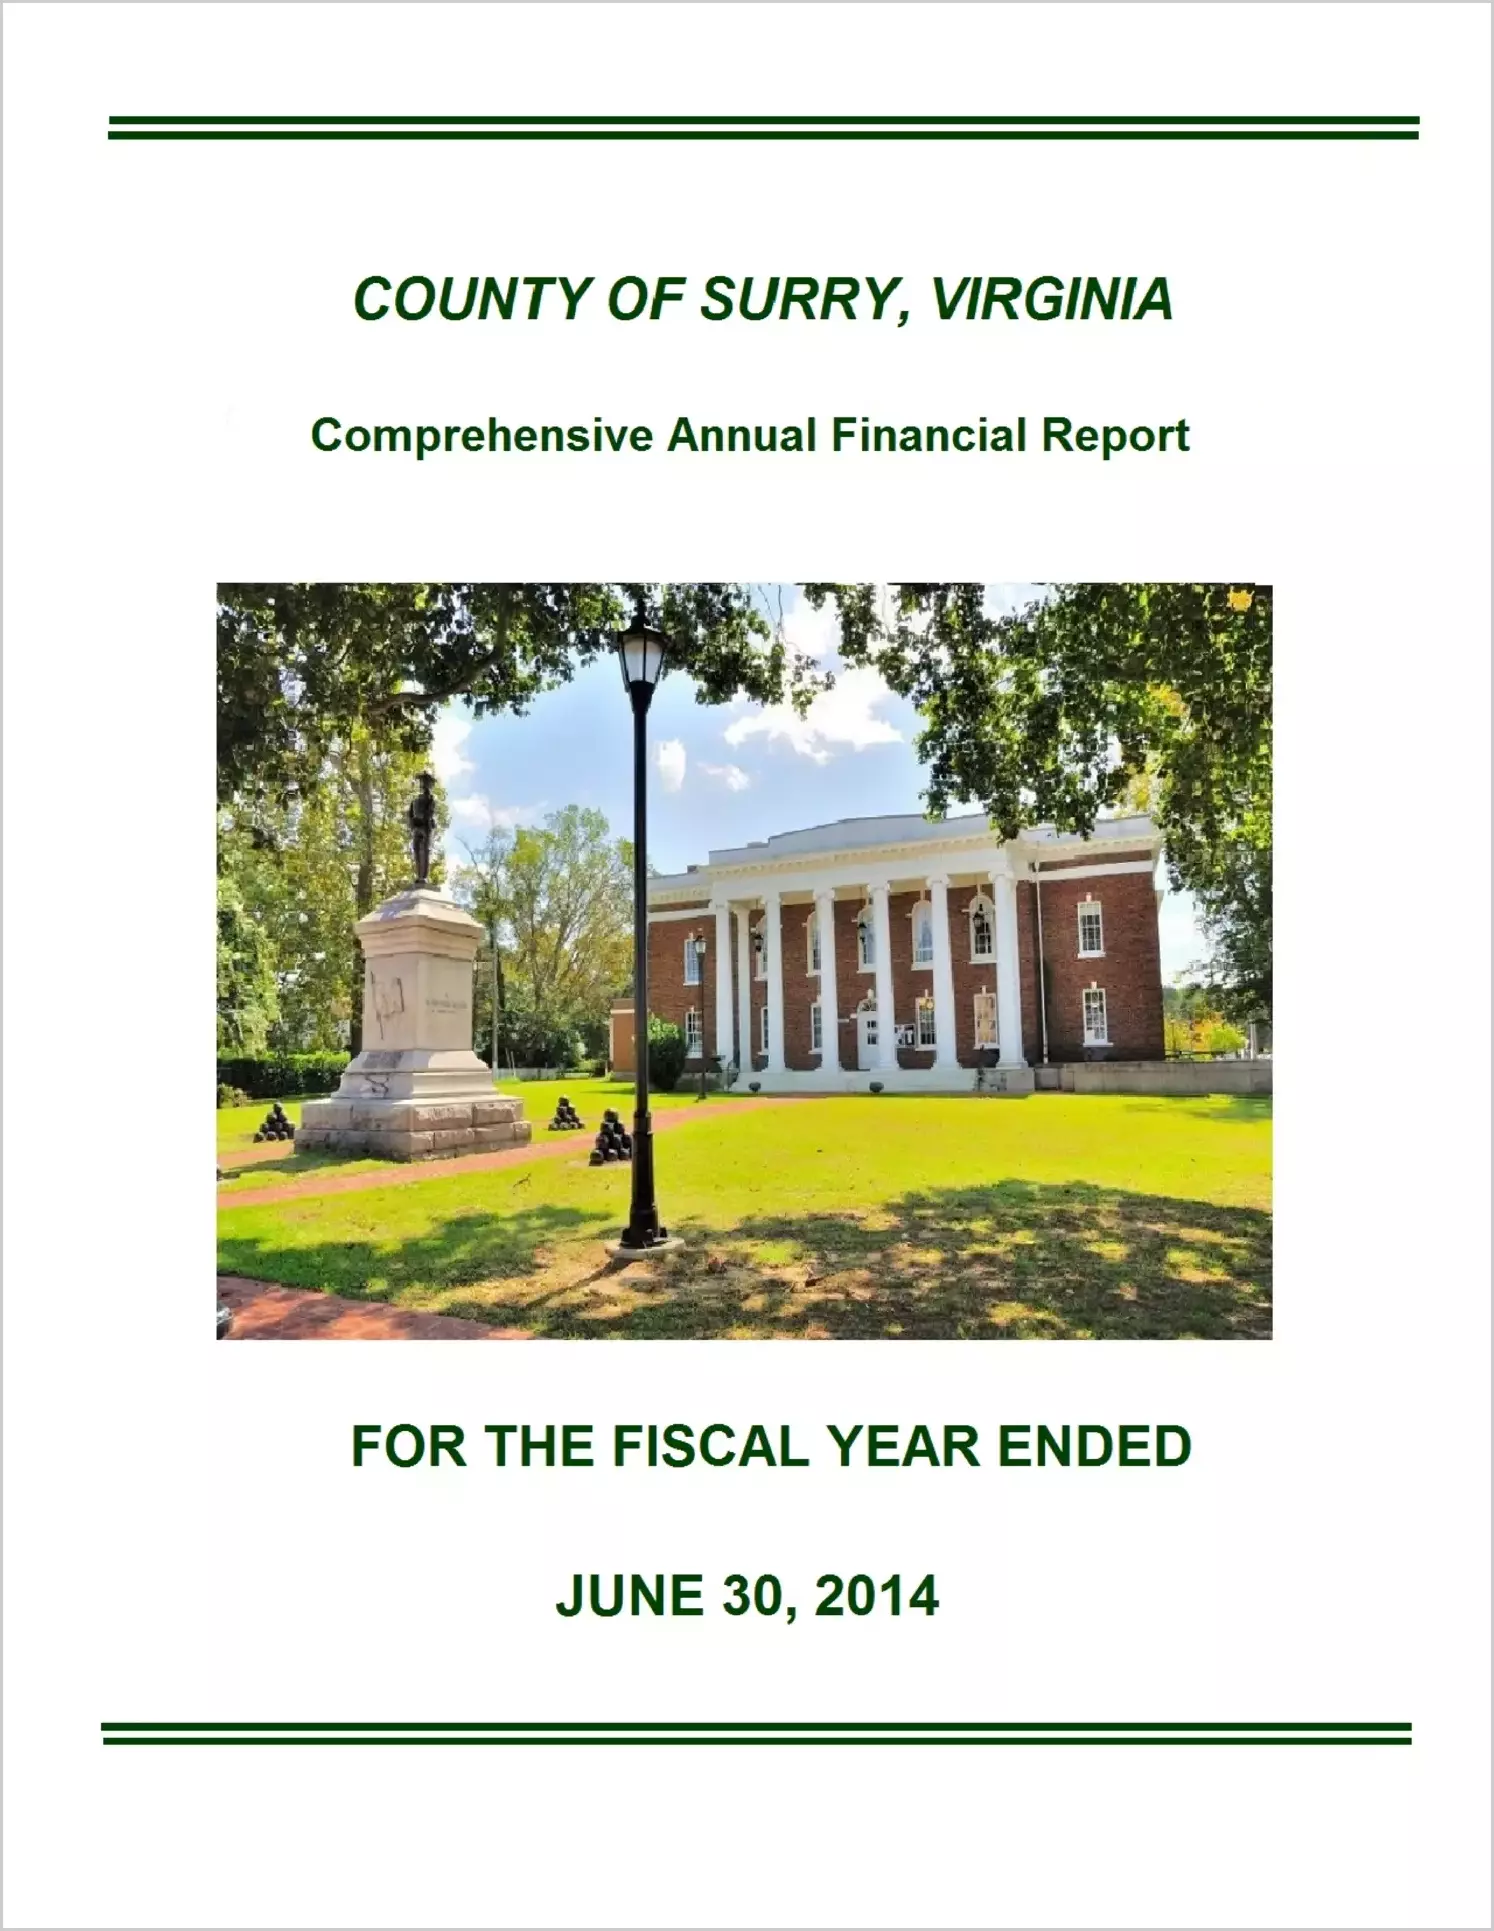 2014 Annual Financial Report for County of Surry